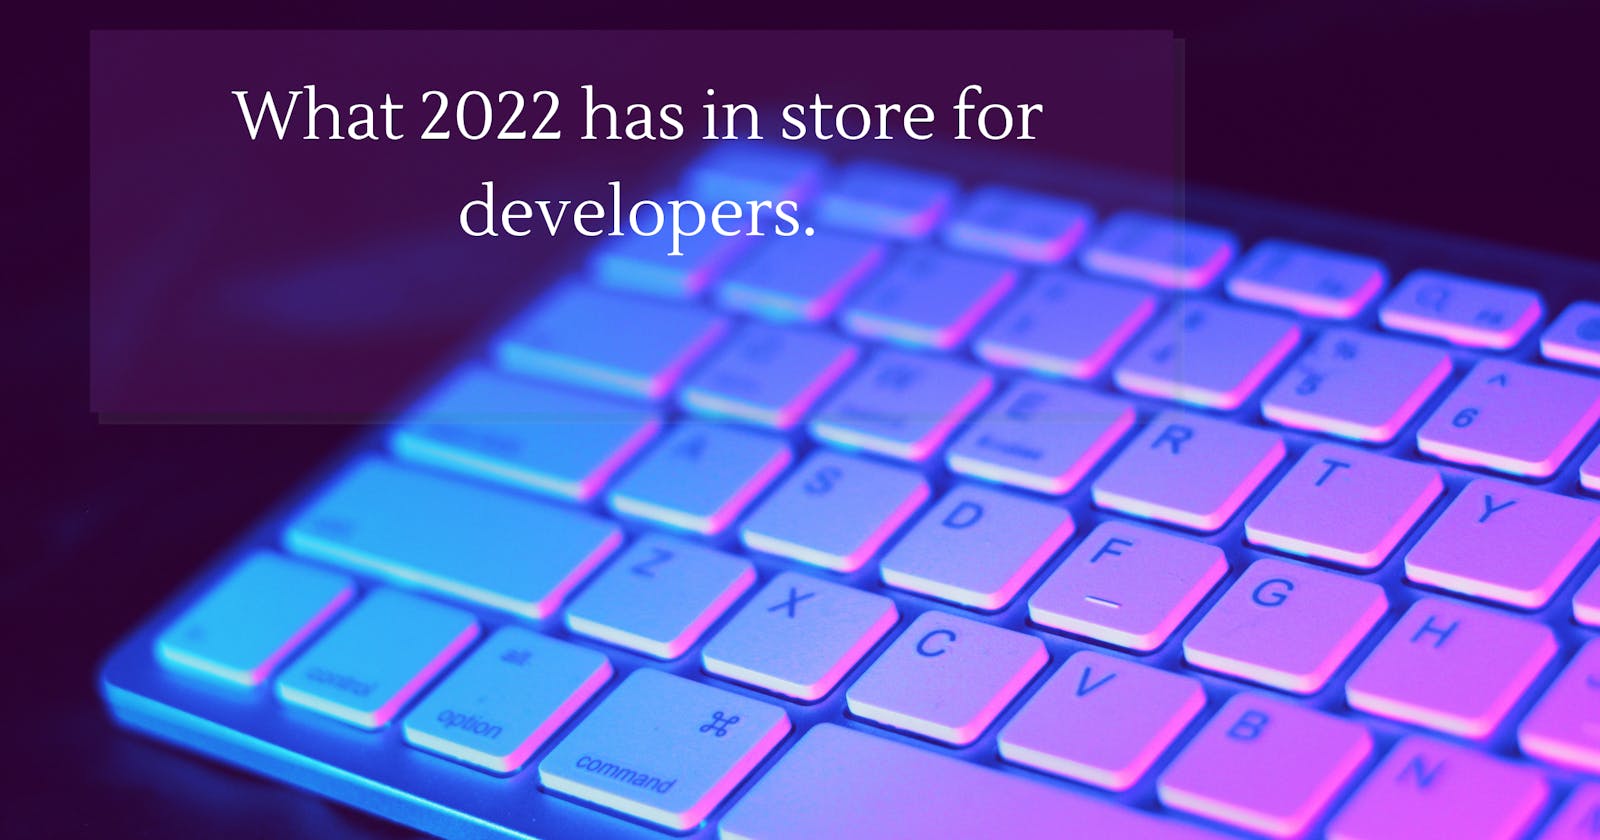 What 2022 has in store for developers!